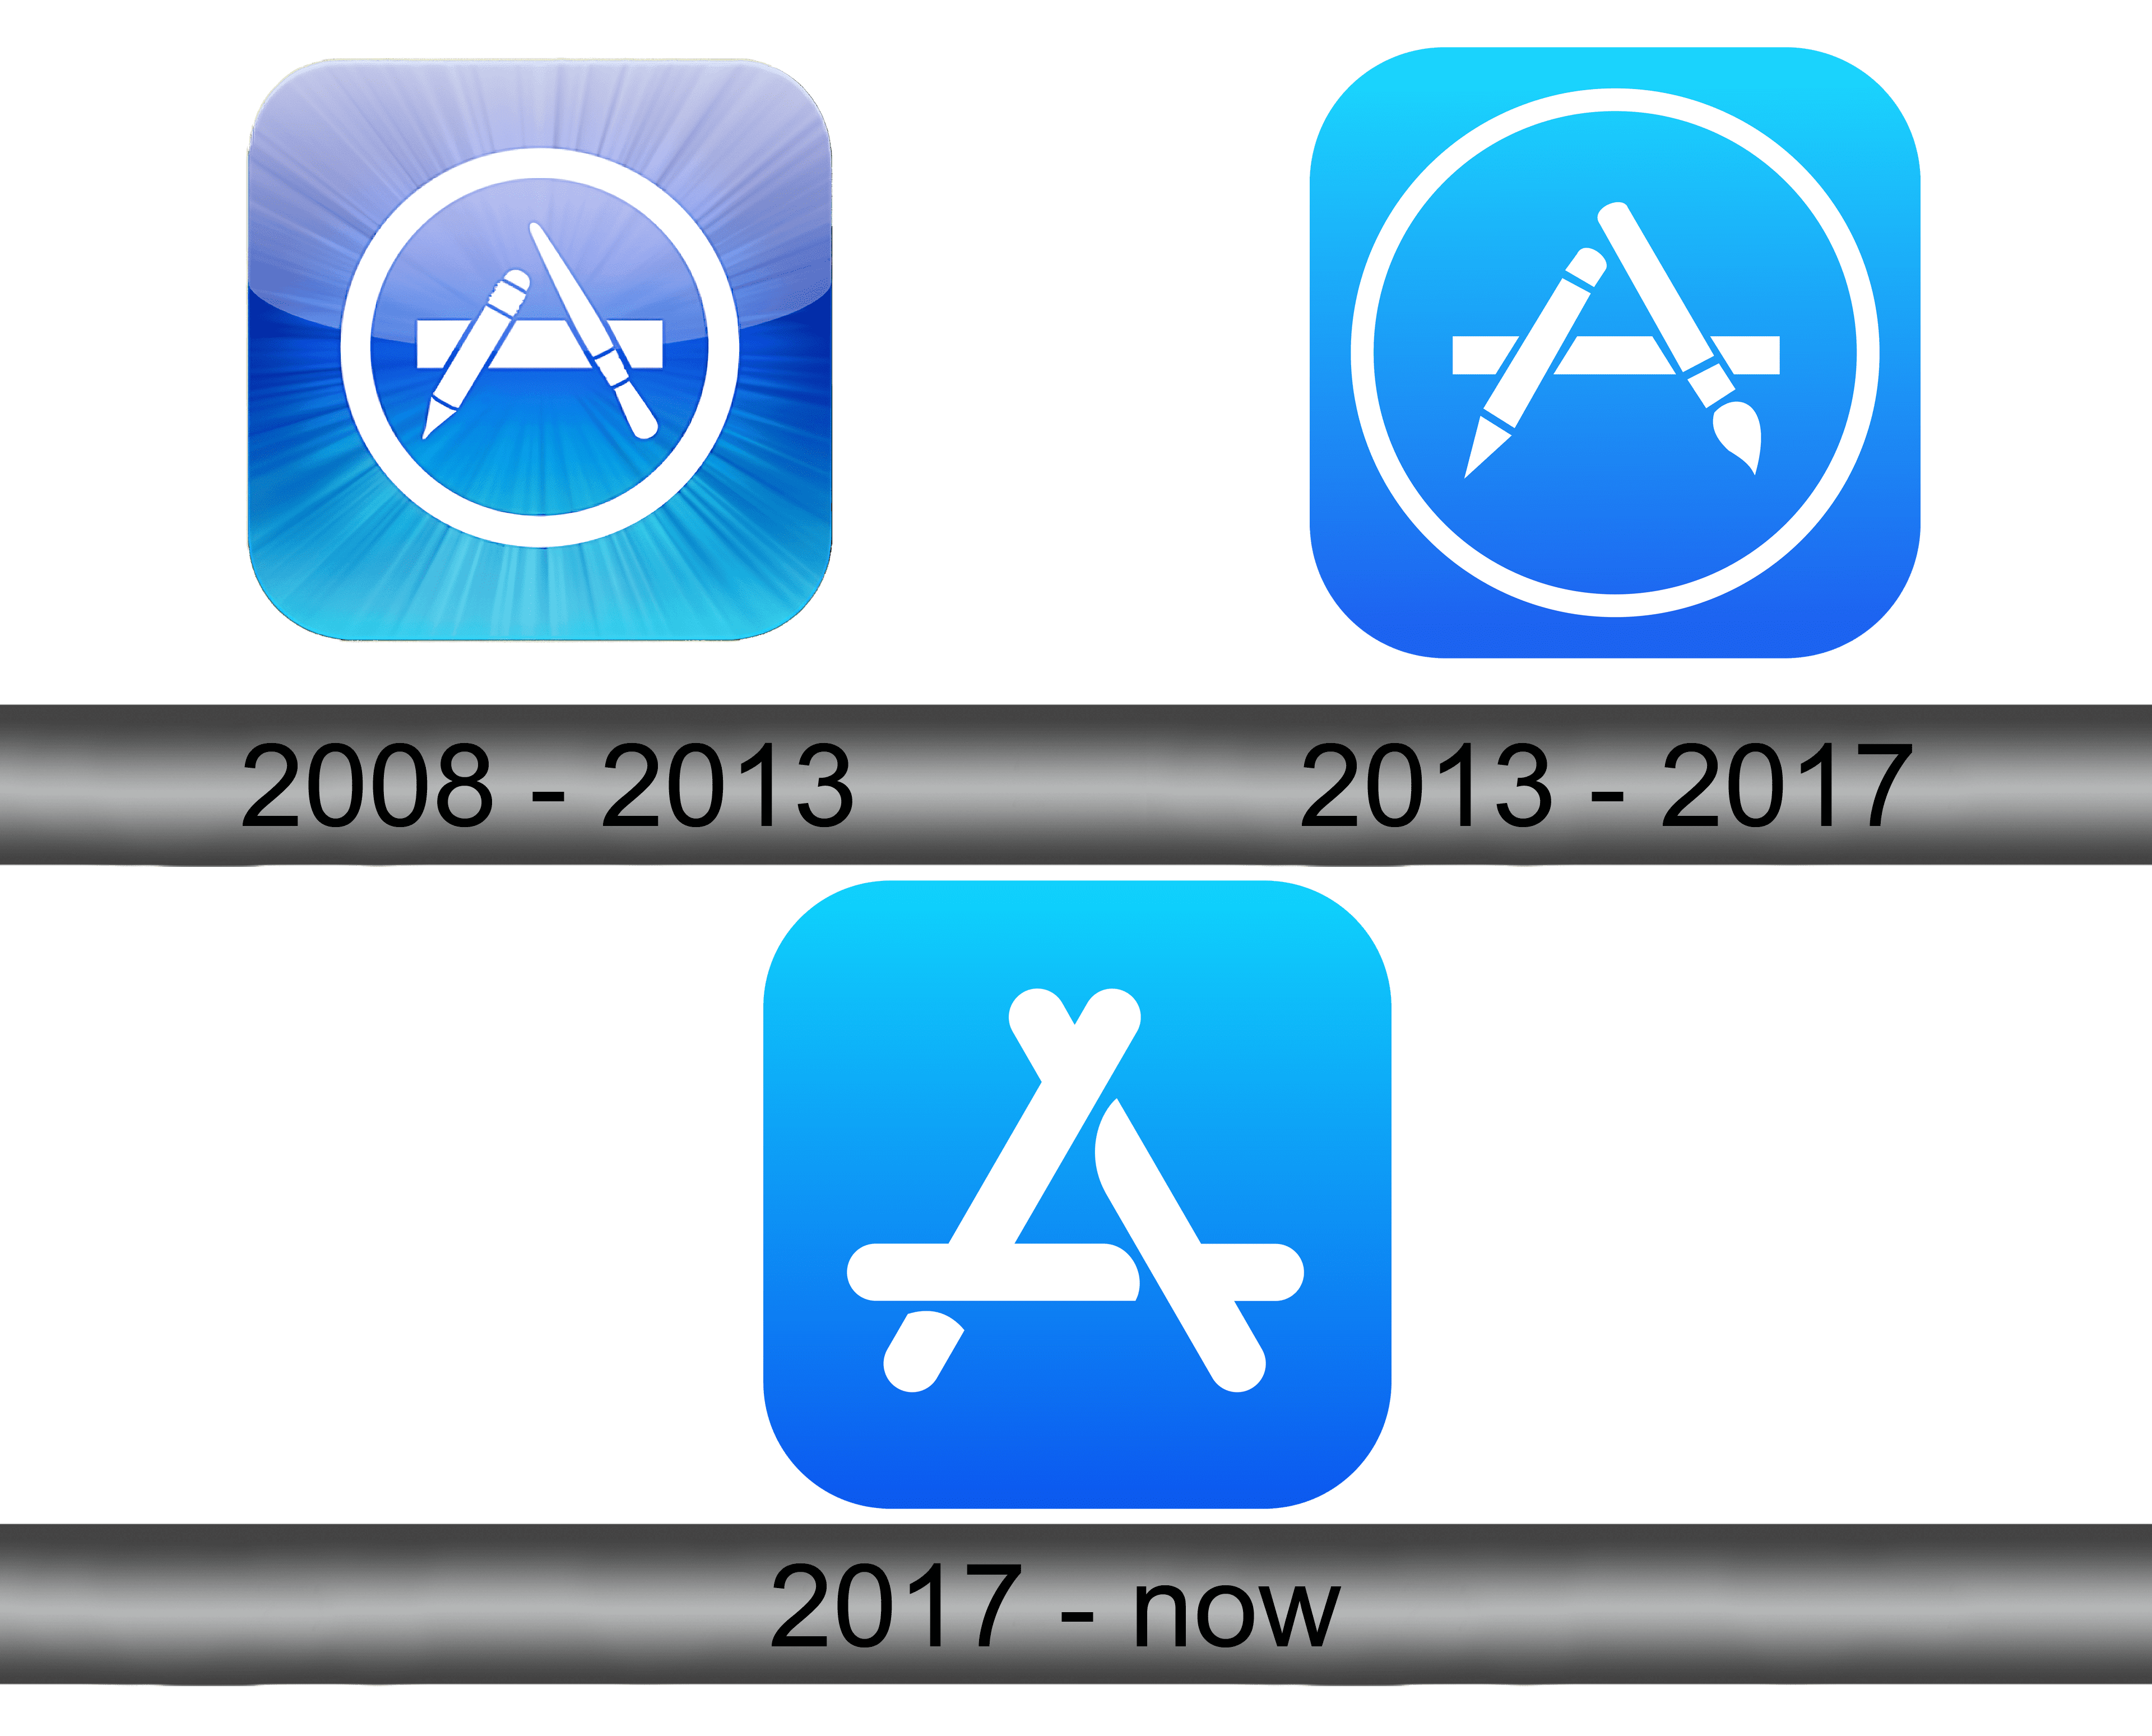 App Store logo and symbol, meaning, history, PNG